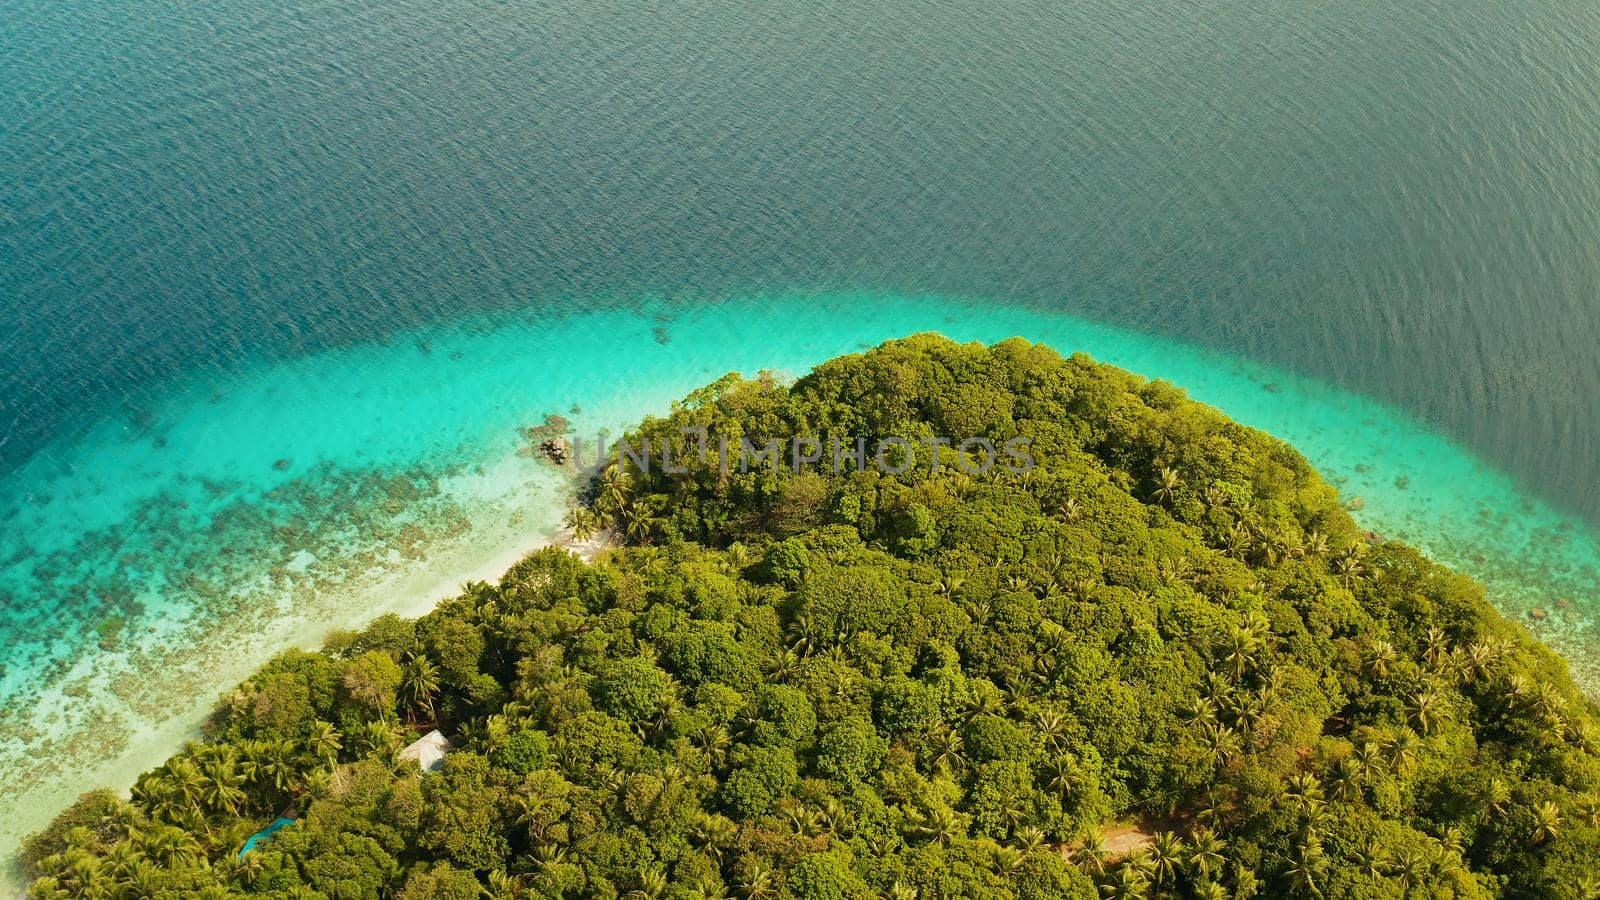 Seascape island coast with forest and palm trees, coral reef with turquoise water, aerial view. Sea water surface in lagoon and coral reef. Coastline of tropical island covered green forest near at sea Camiguin, Philippines